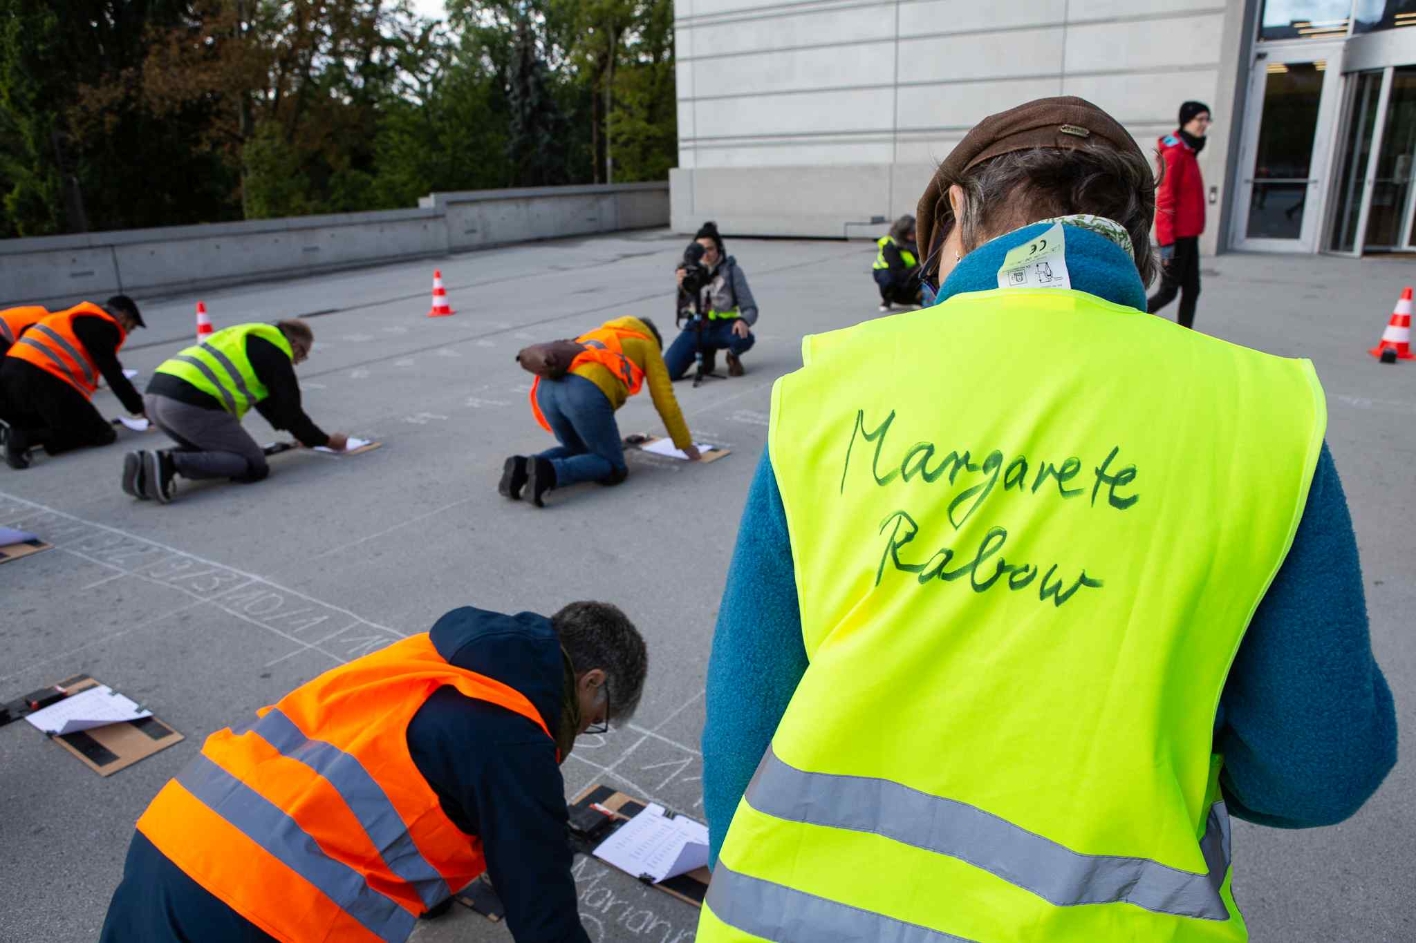 The initiator of the writing campaign, Margarete Rabow, instructs volunteer writers. She can be recognized by a warning vest with her name on the back. In the background, many participants kneel in orange vests and write their names on the ground with chalk.